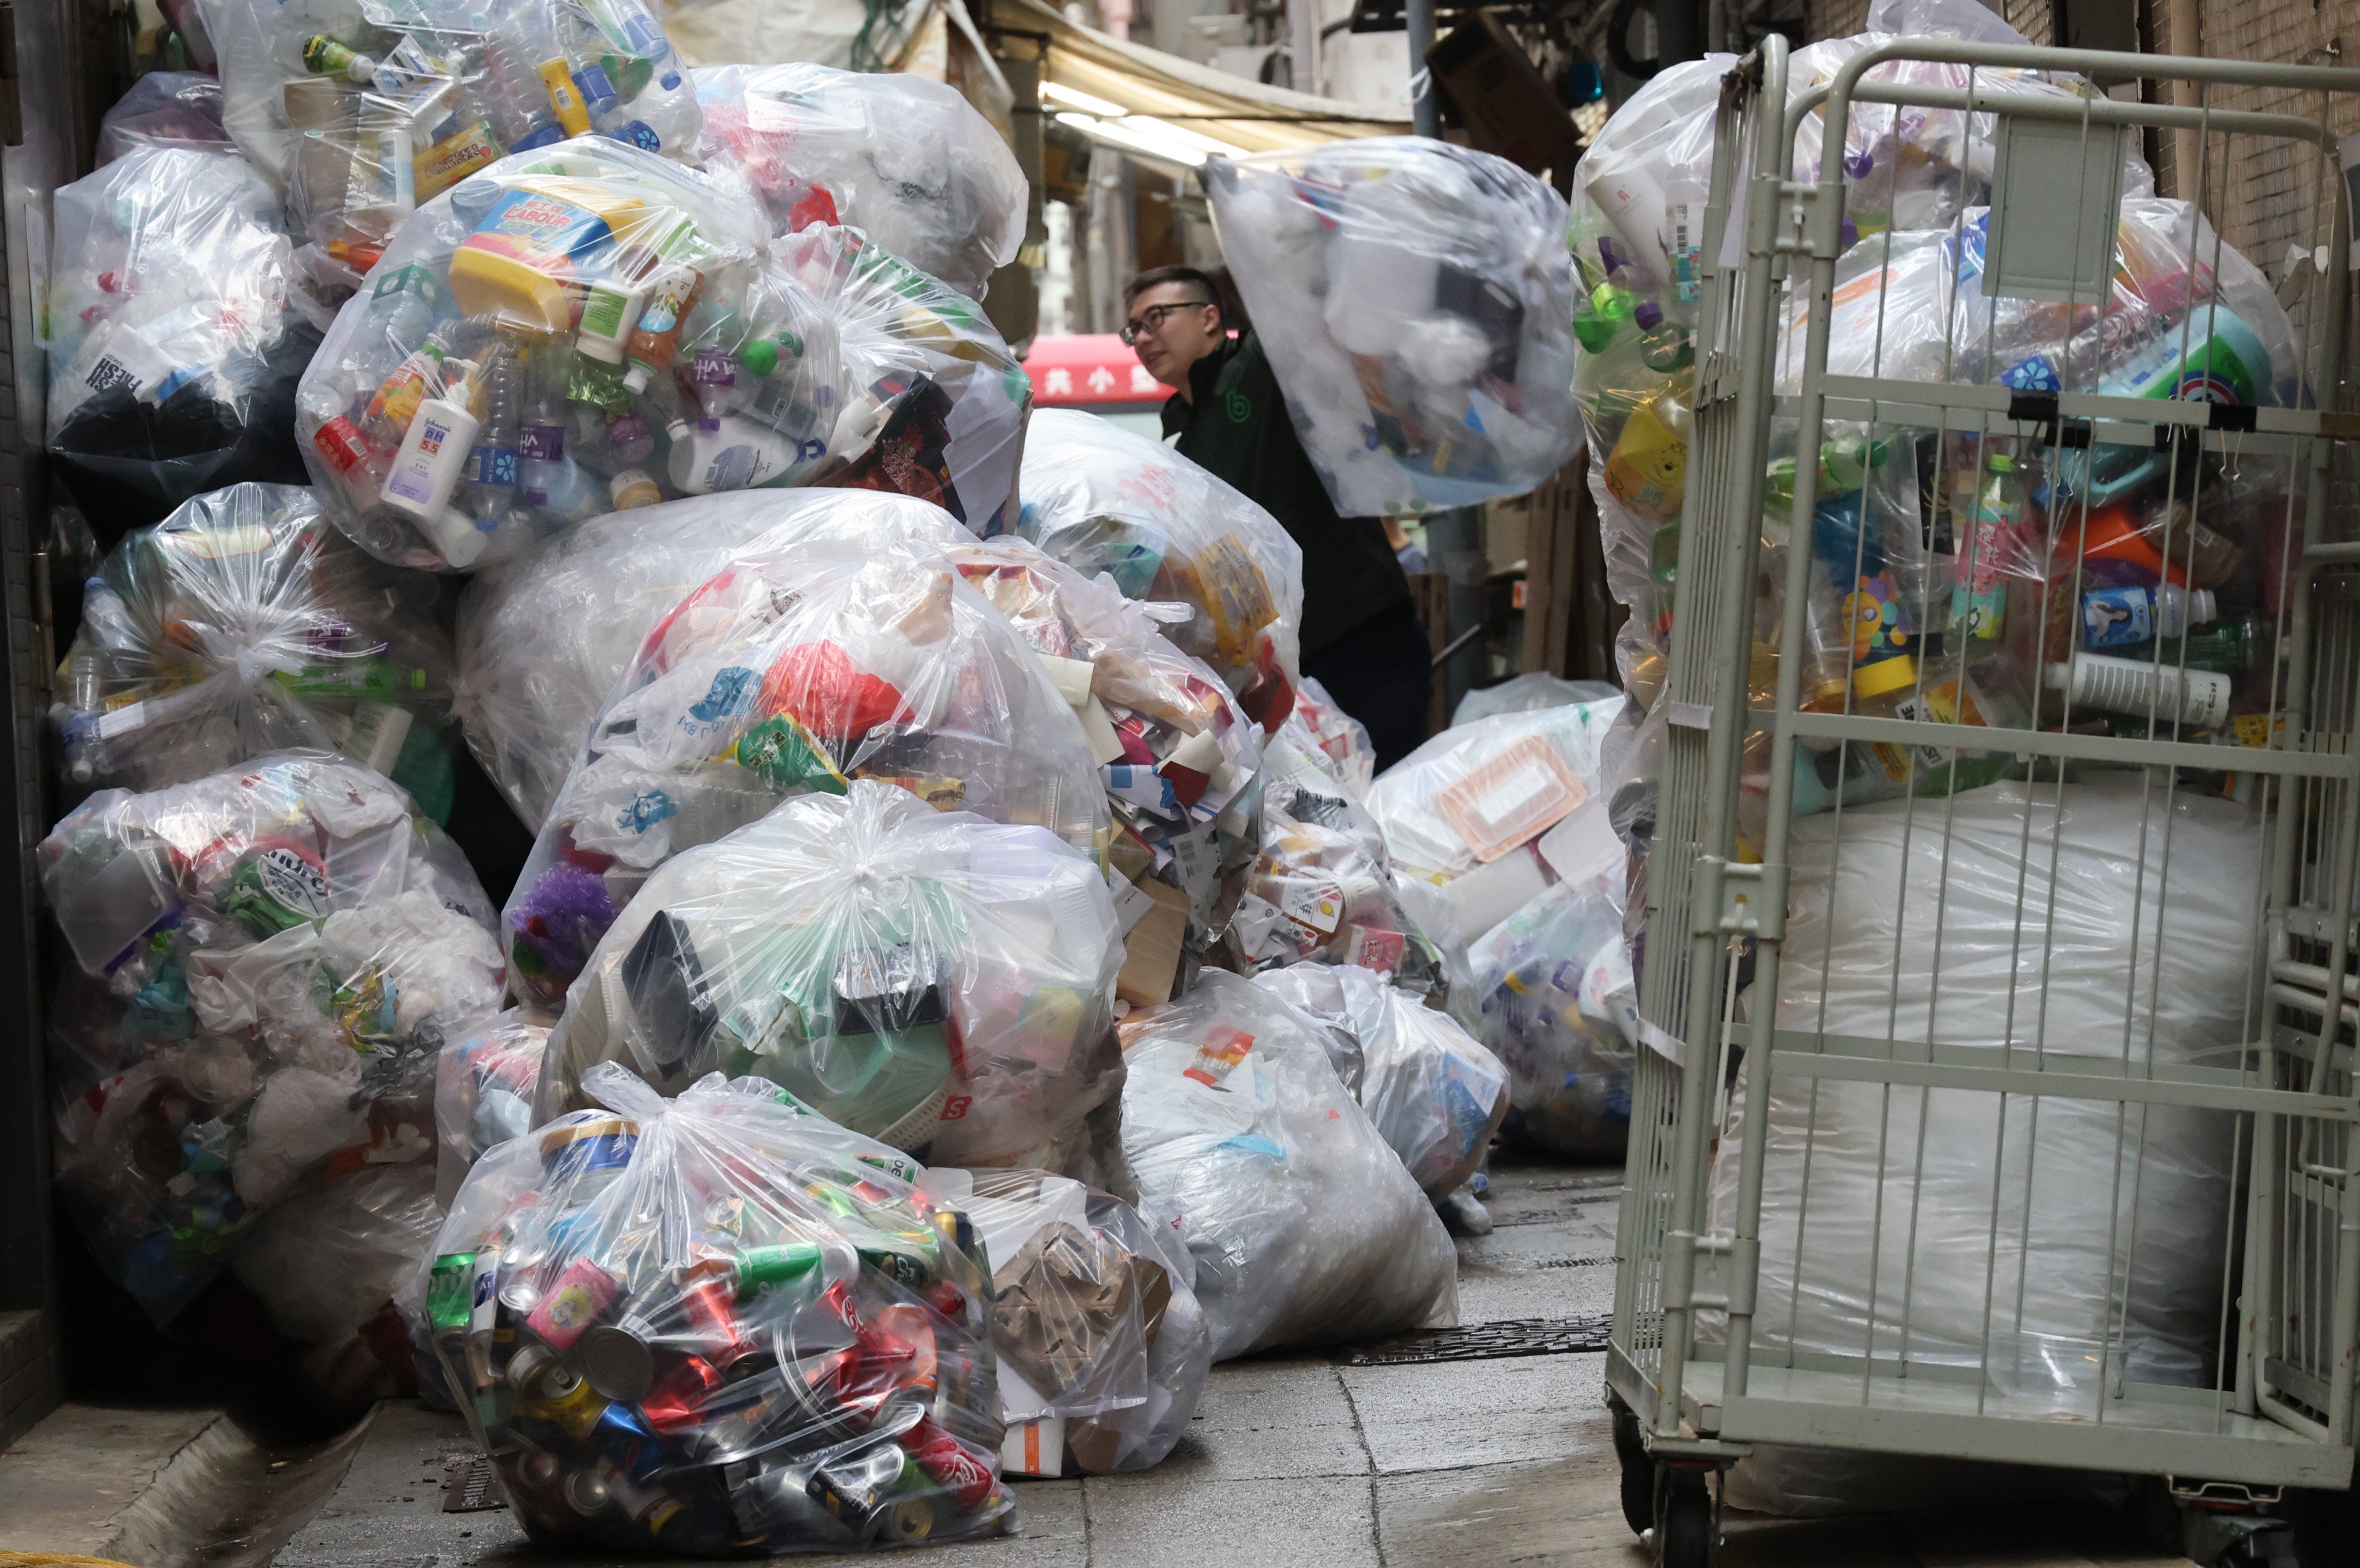 A worker at the Green Hung Hom Recycling Store clears waste piled up in front of a Green@Community recycling centre on February 7. The absence of recycling bins in many parts of Hong Kong is hampering efforts to prepare the public for the upcoming waste charging scheme. Photo: Jelly Tse